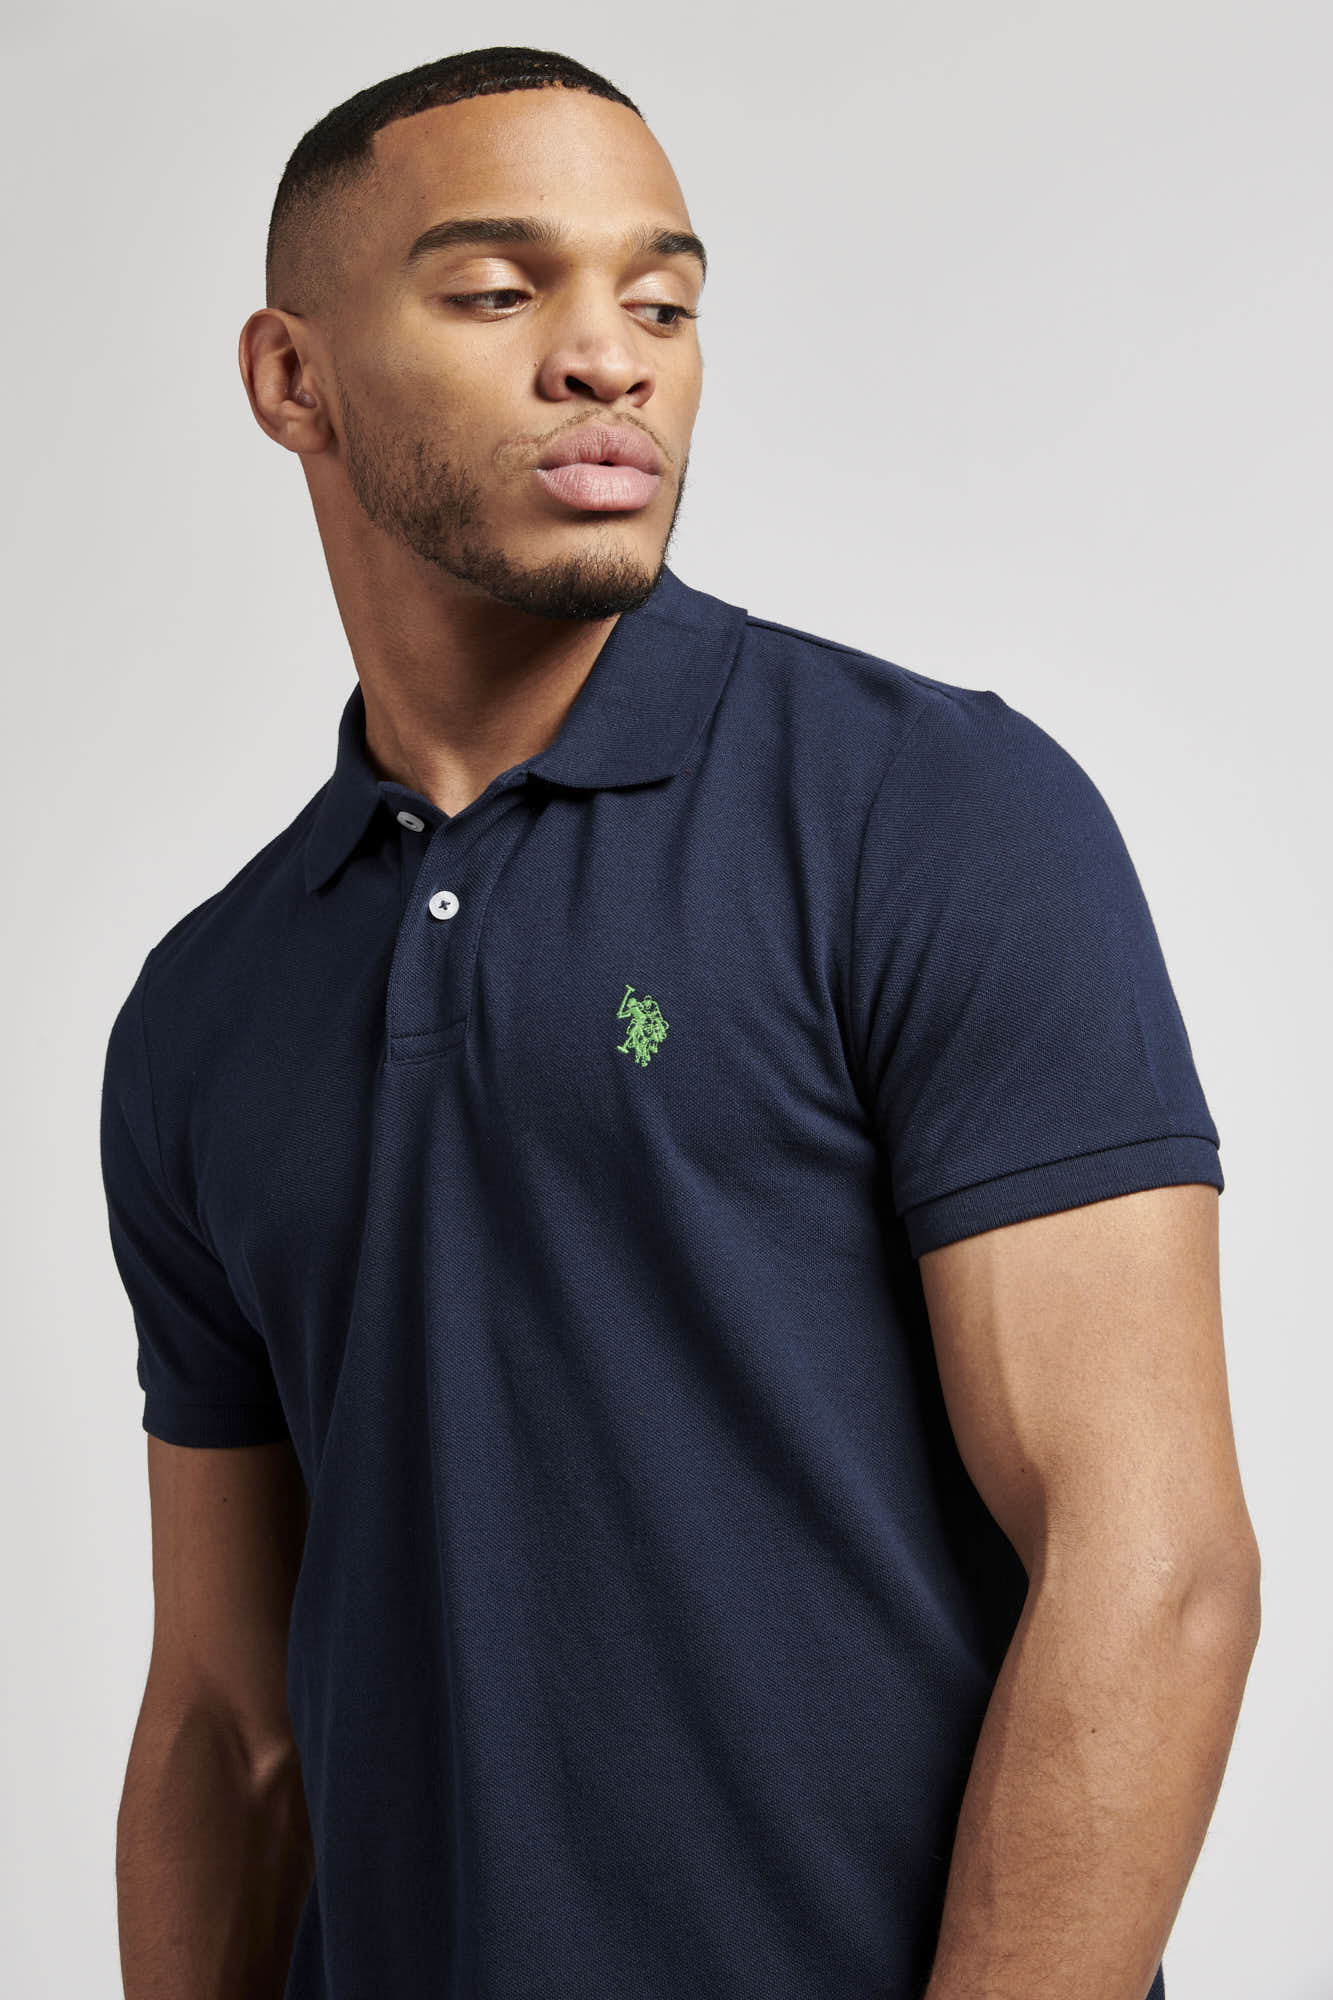 Mens Life Polo Shirt in Navy Blue